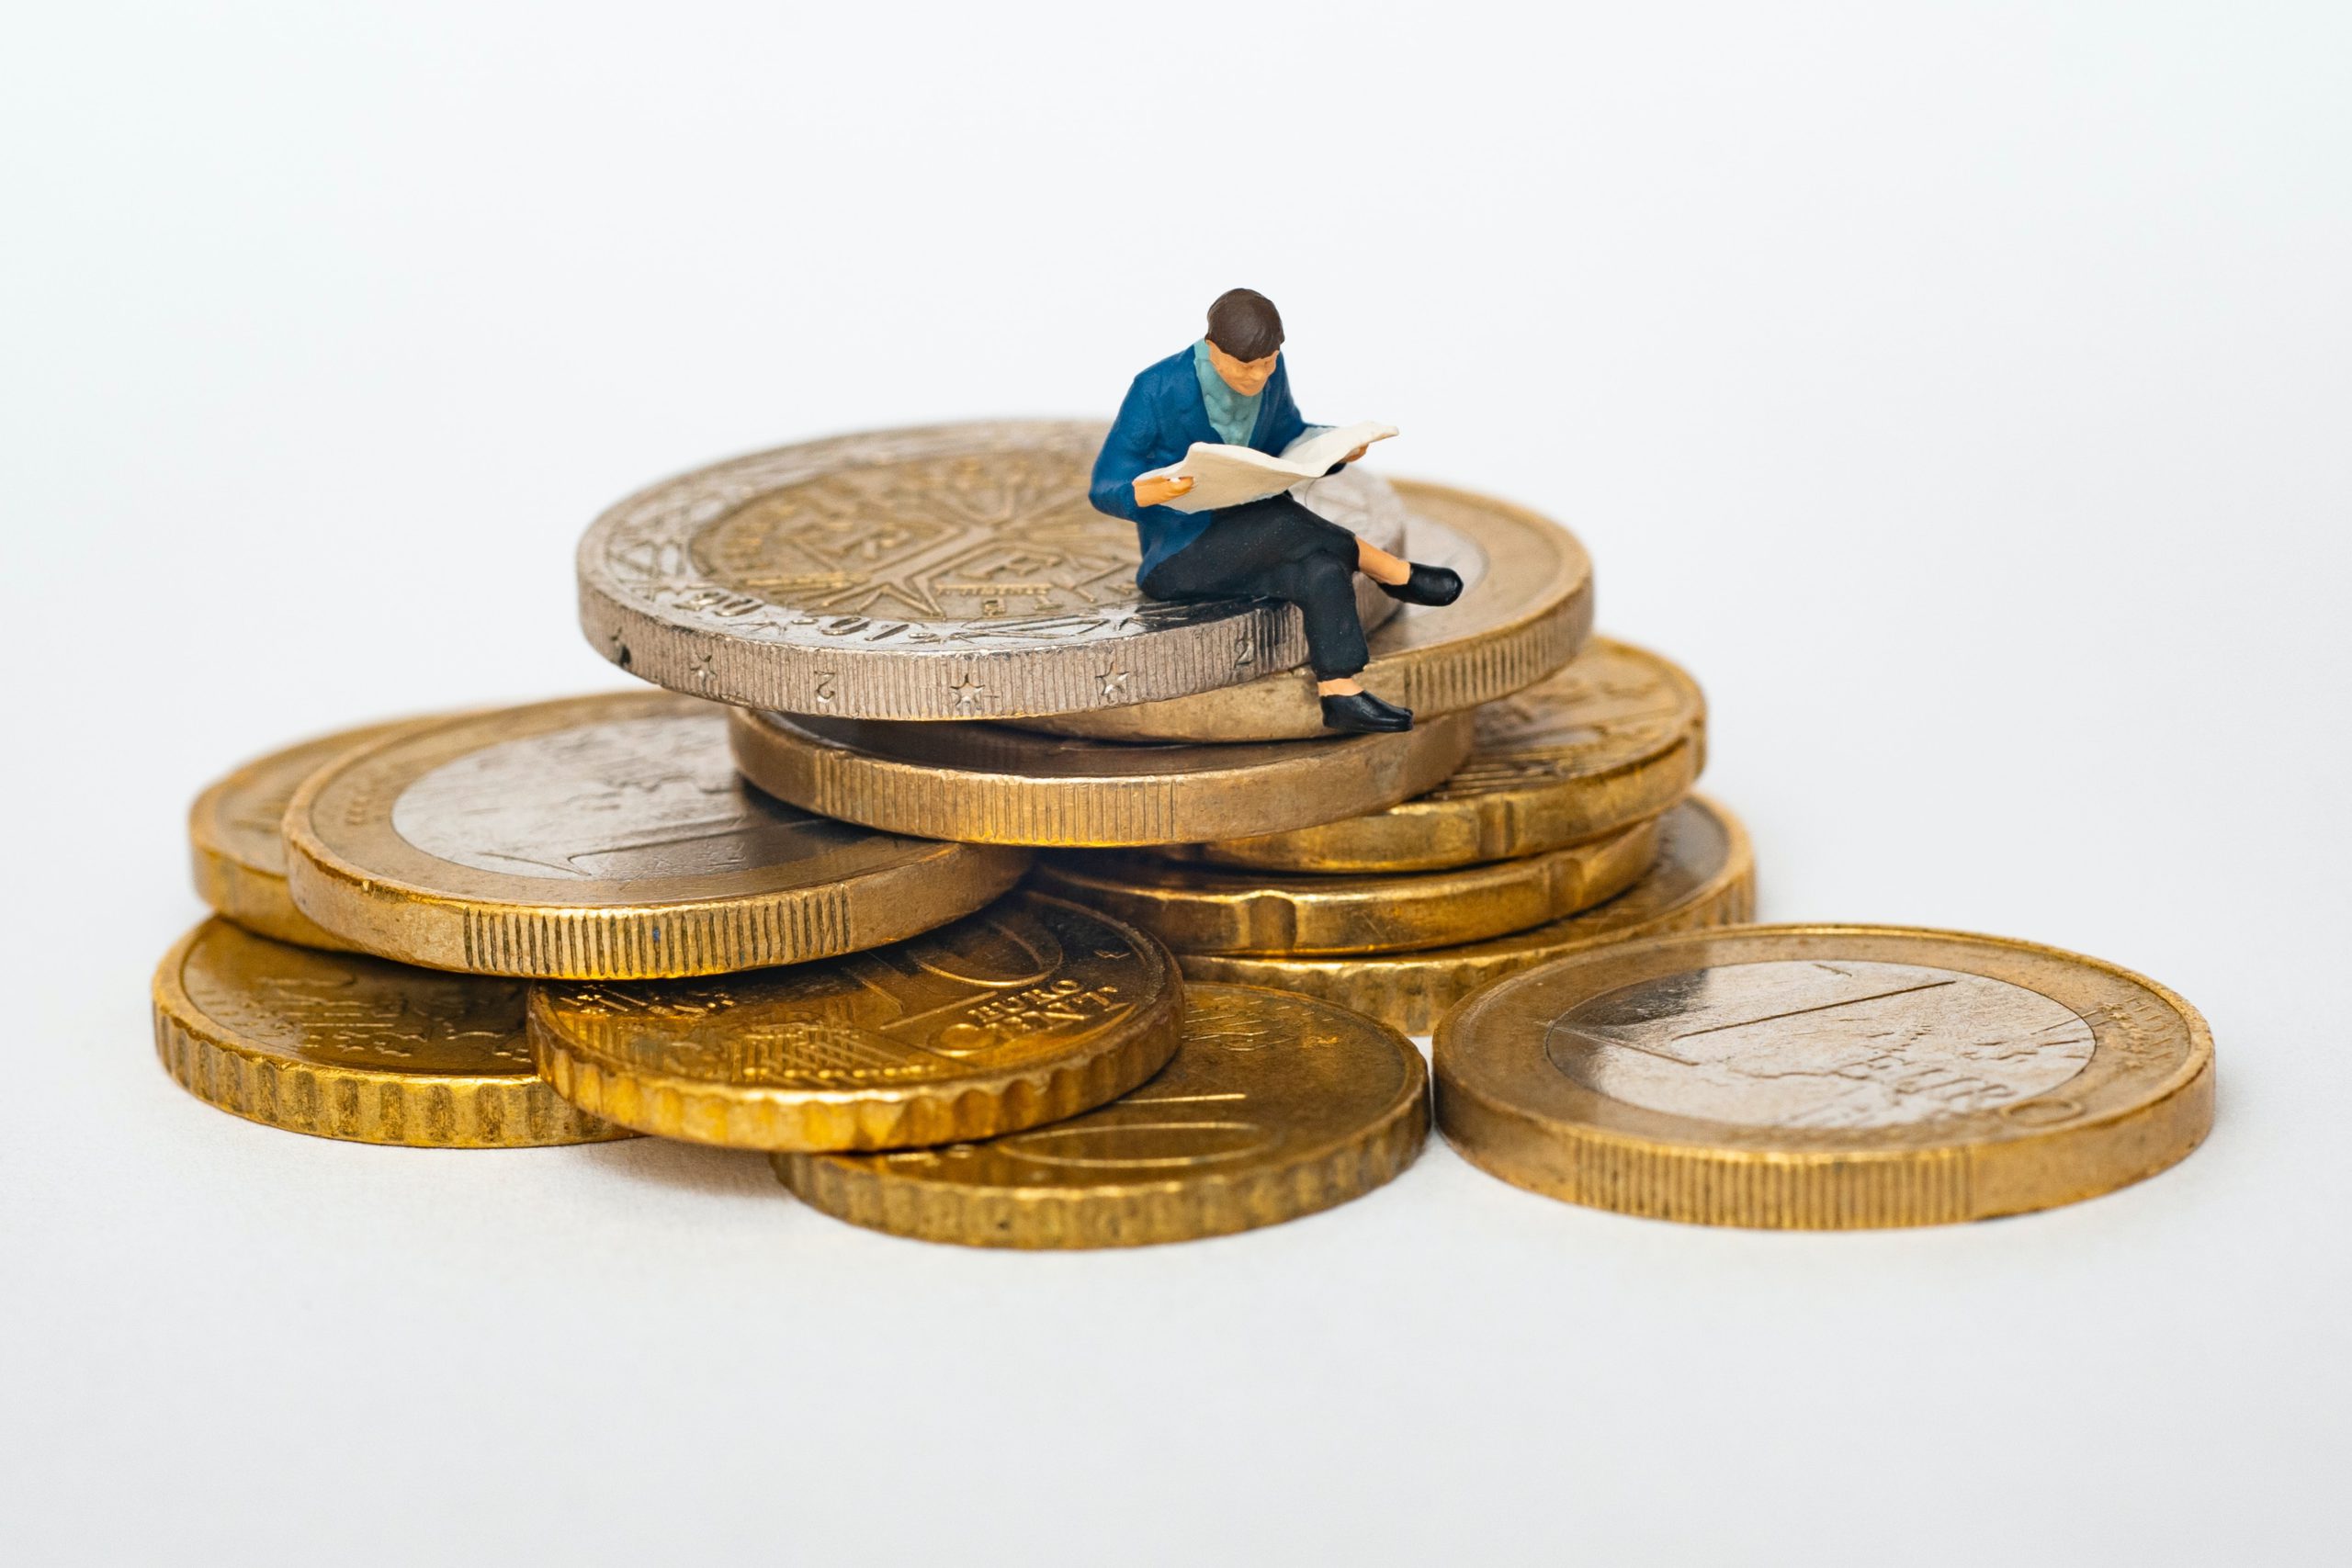 Miniature model of person sitting on Euro coins and reading a book 